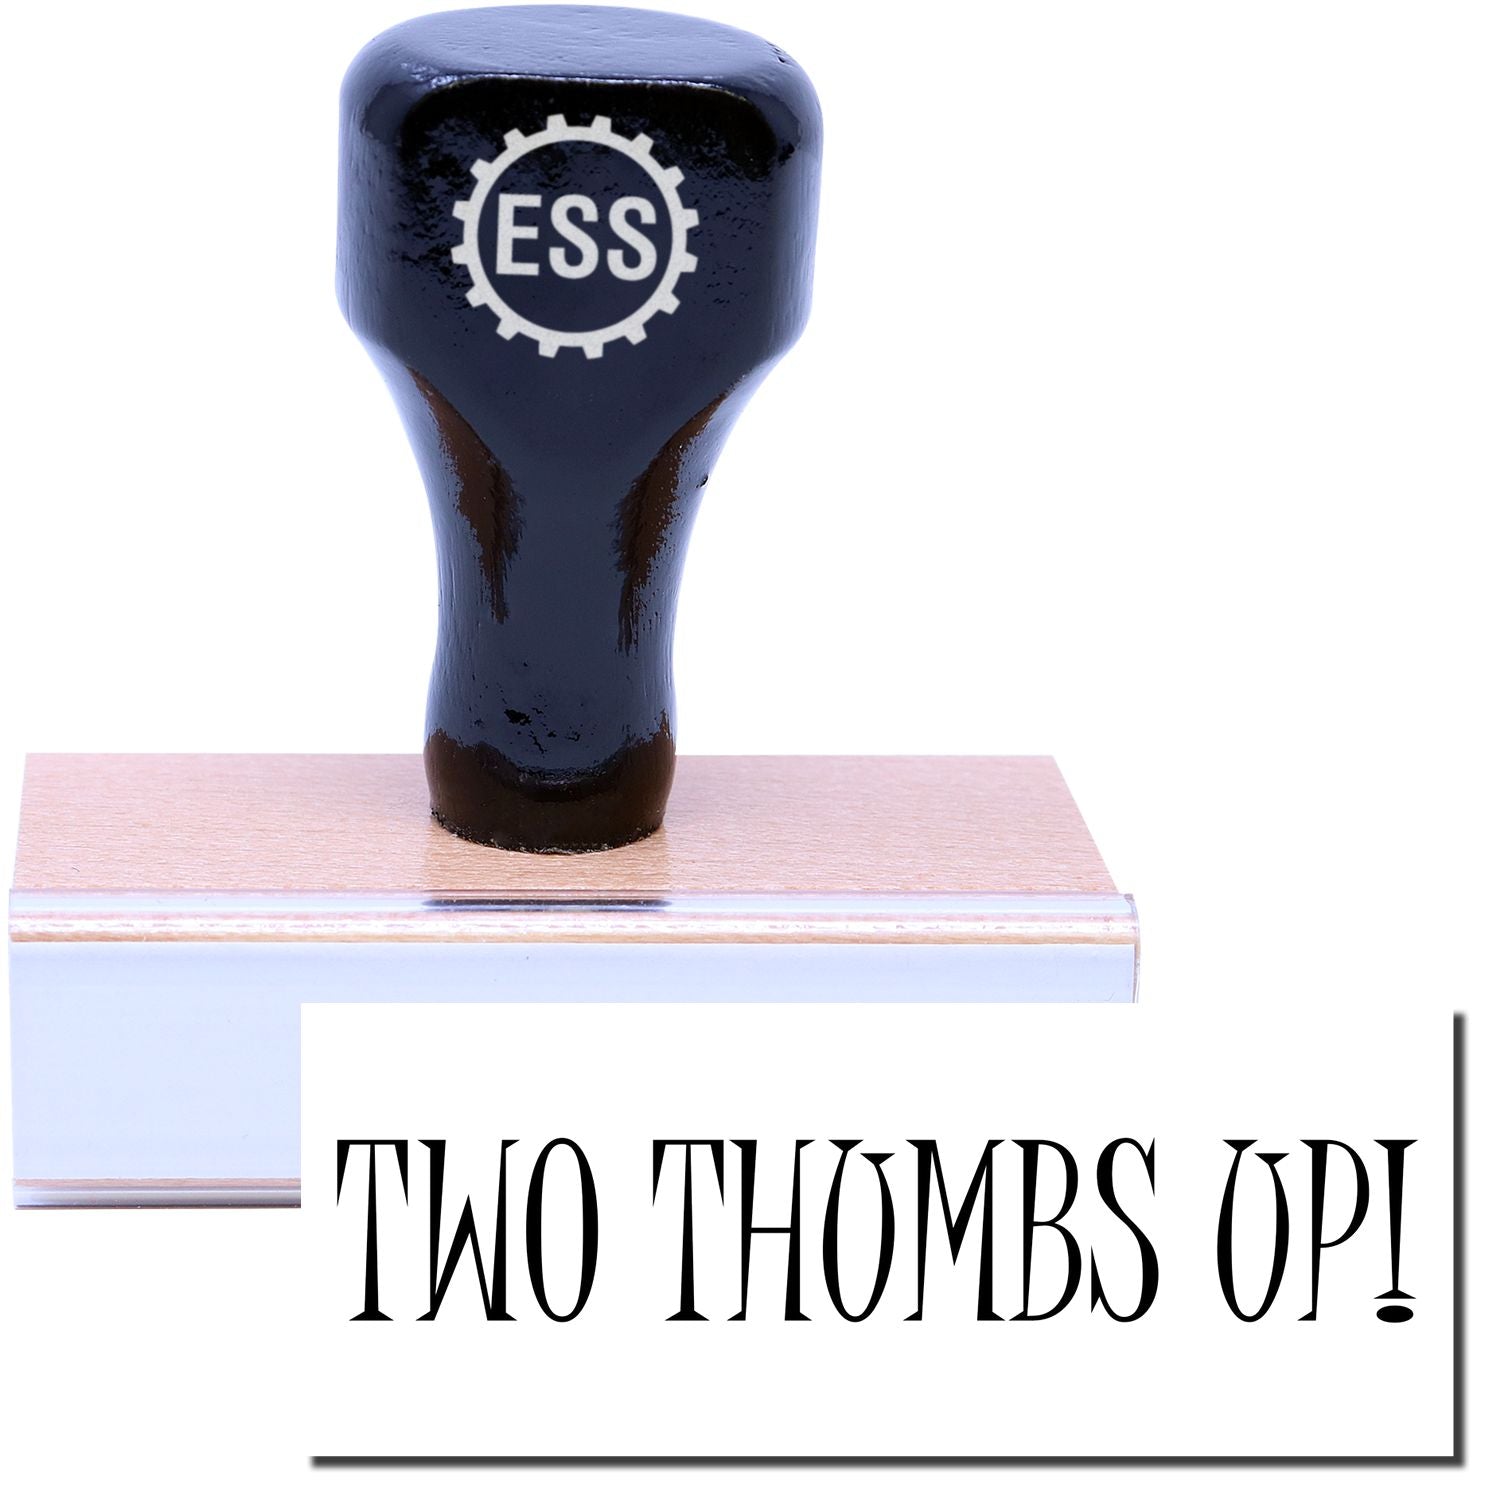 A stock office rubber stamp with a stamped image showing how the text "TWO THUMBS UP!" in a large font is displayed after stamping.